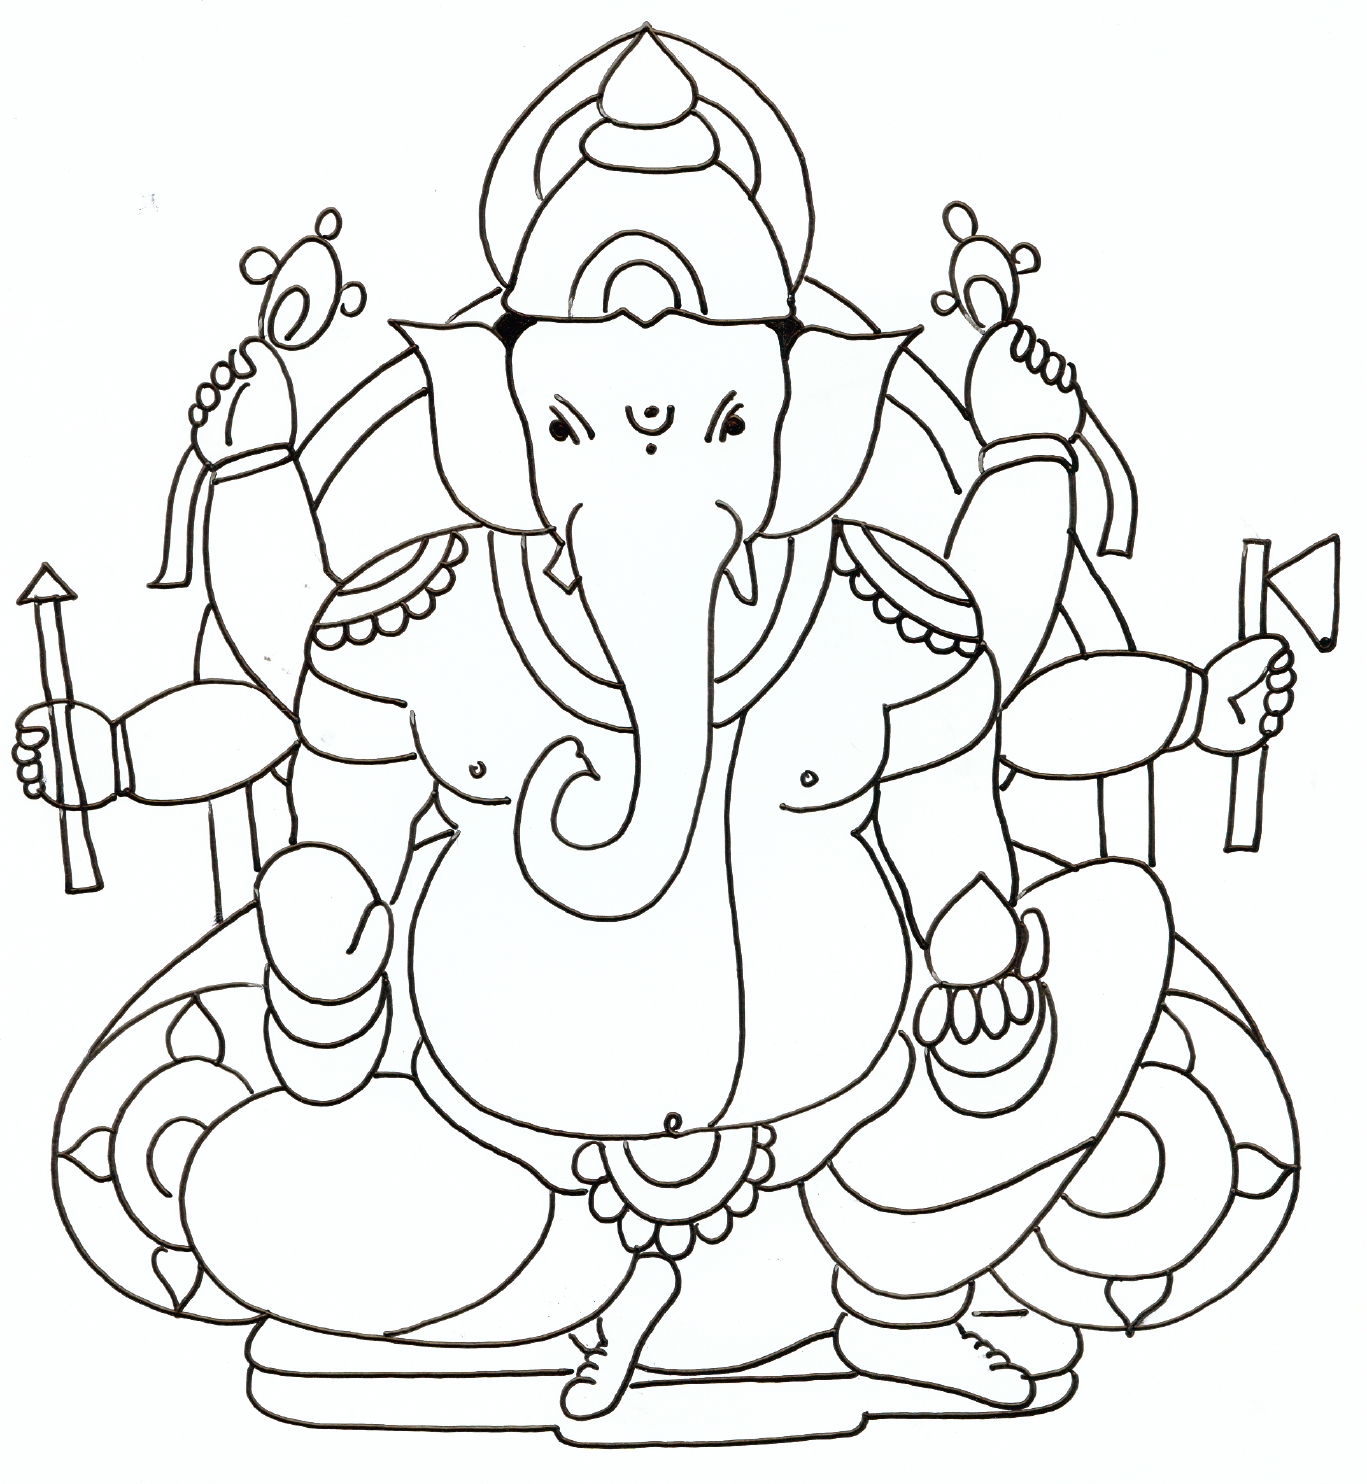 Free Ganesh Drawings Download Free Clip Art Free Clip Art On Clipart Library Ganesh easy sketch at paintingvalley com explore collection of. clipart library